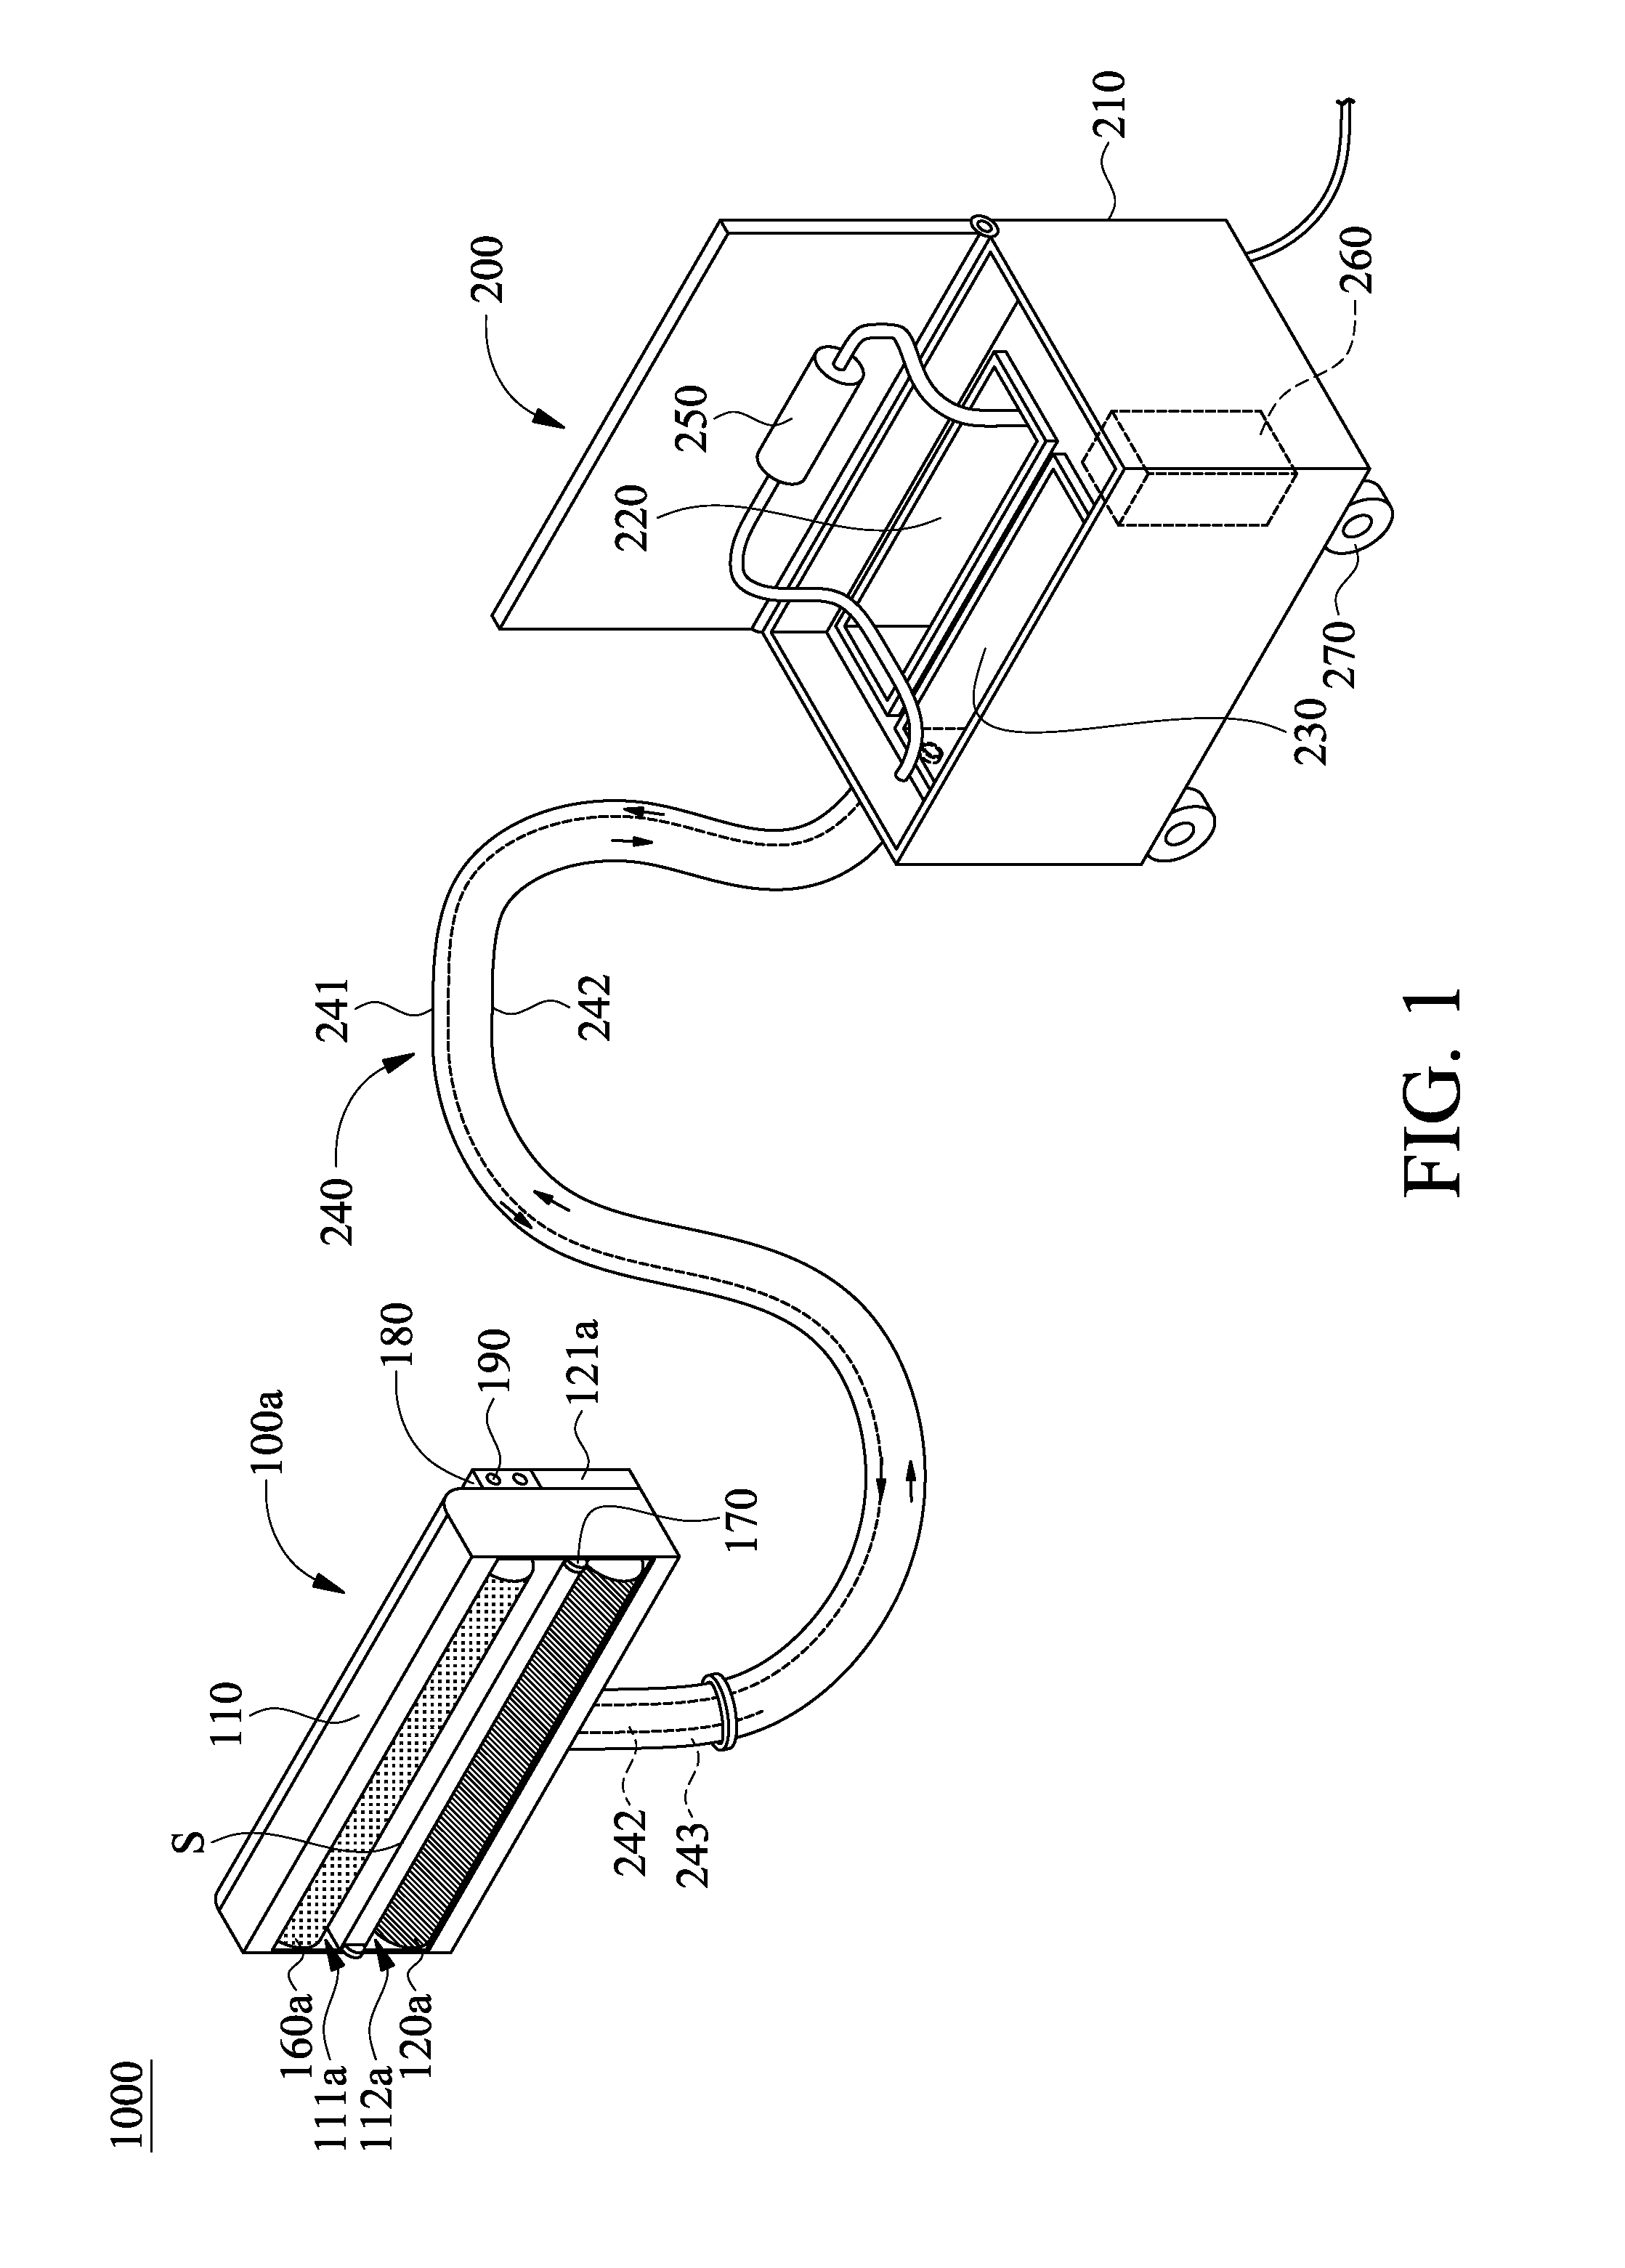 Electric sweeping washing device